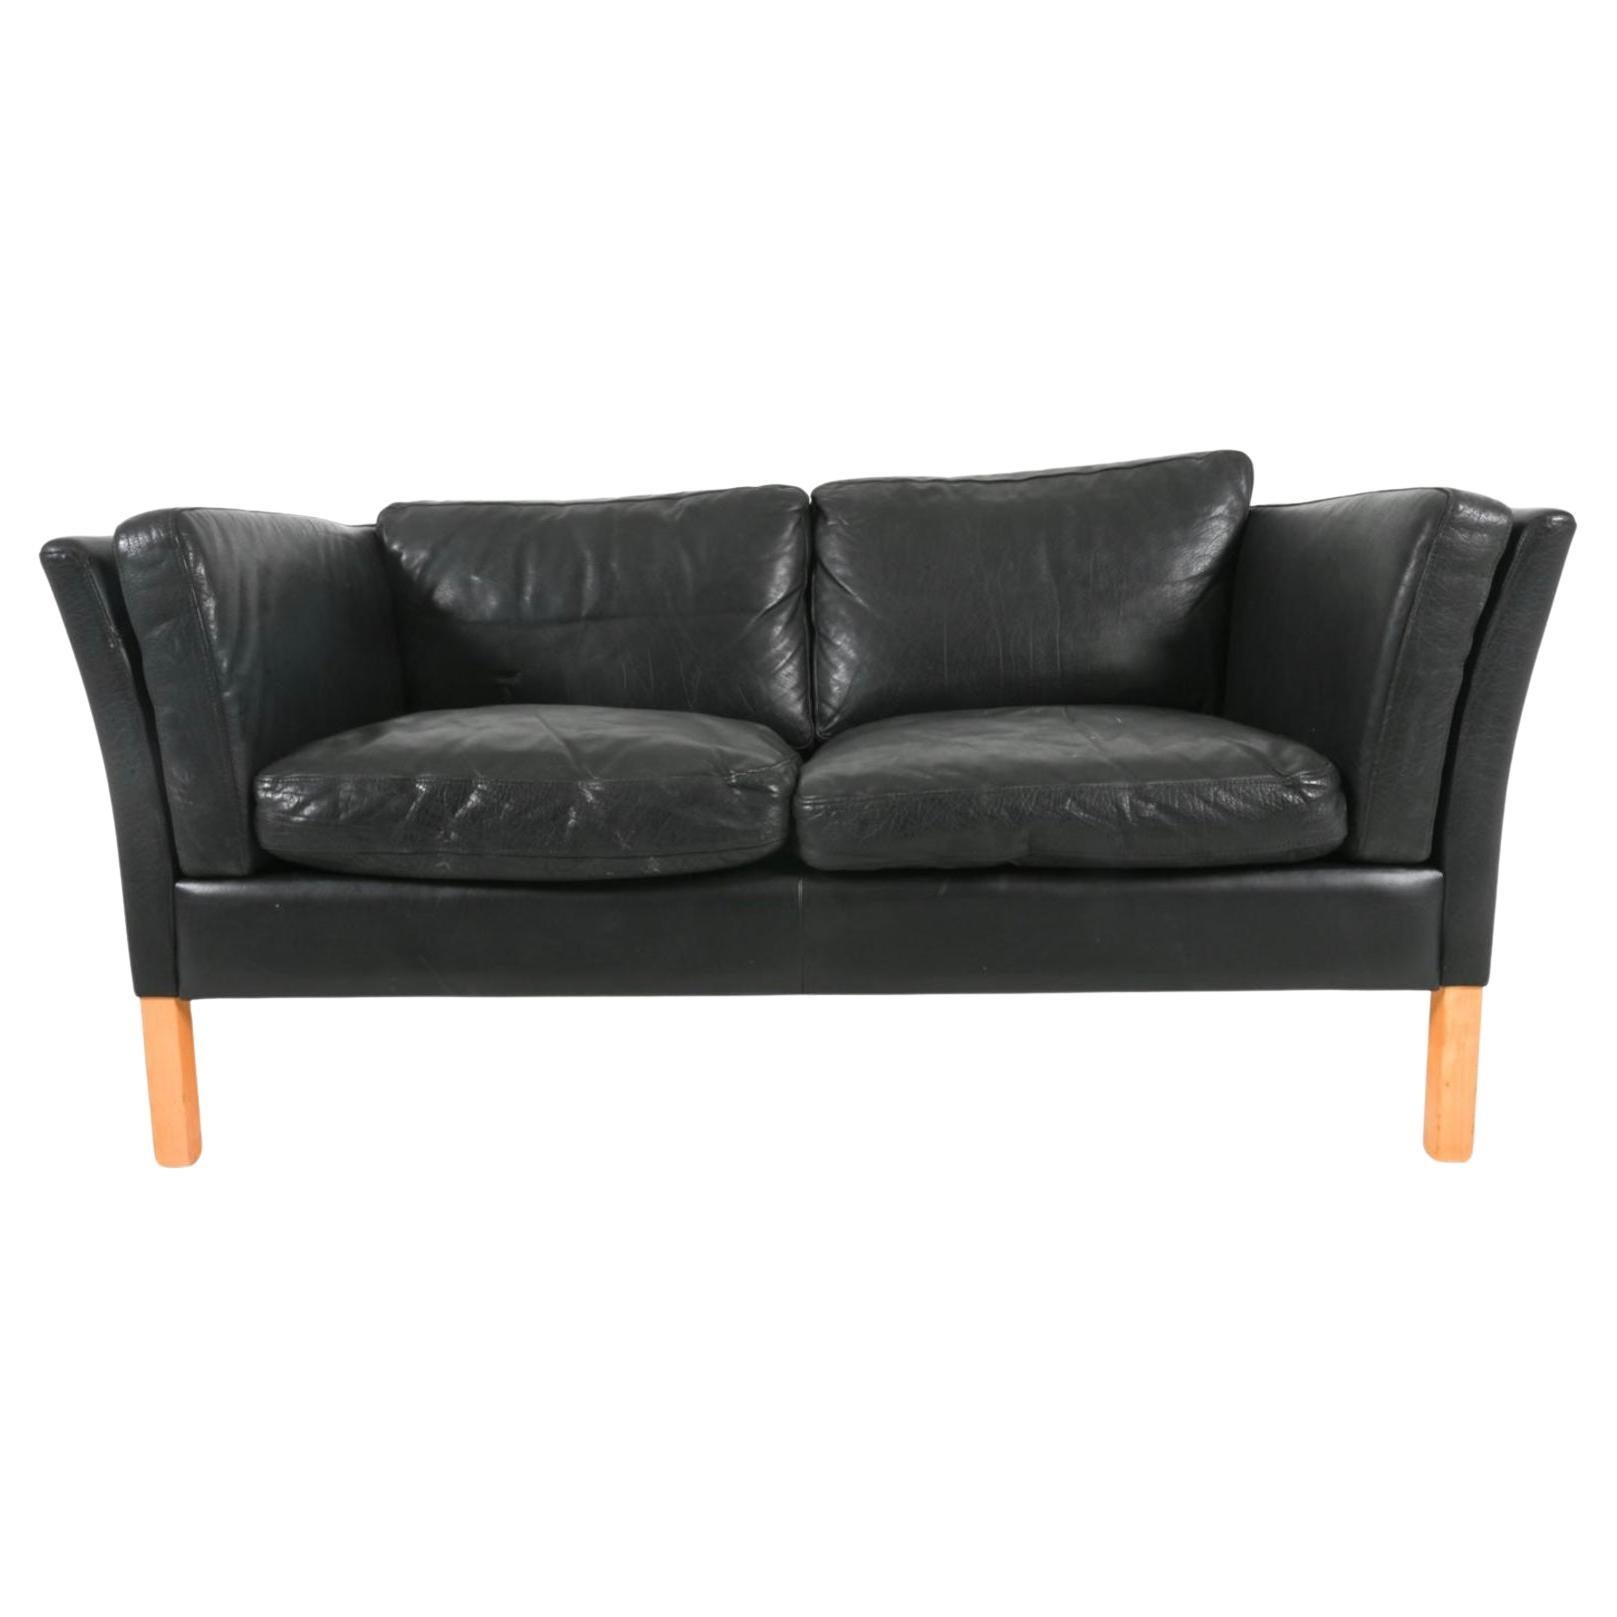 Midcentury Danish Modern Low Curved Arm Black Leather 2 Seat Sofa birch Legs For Sale